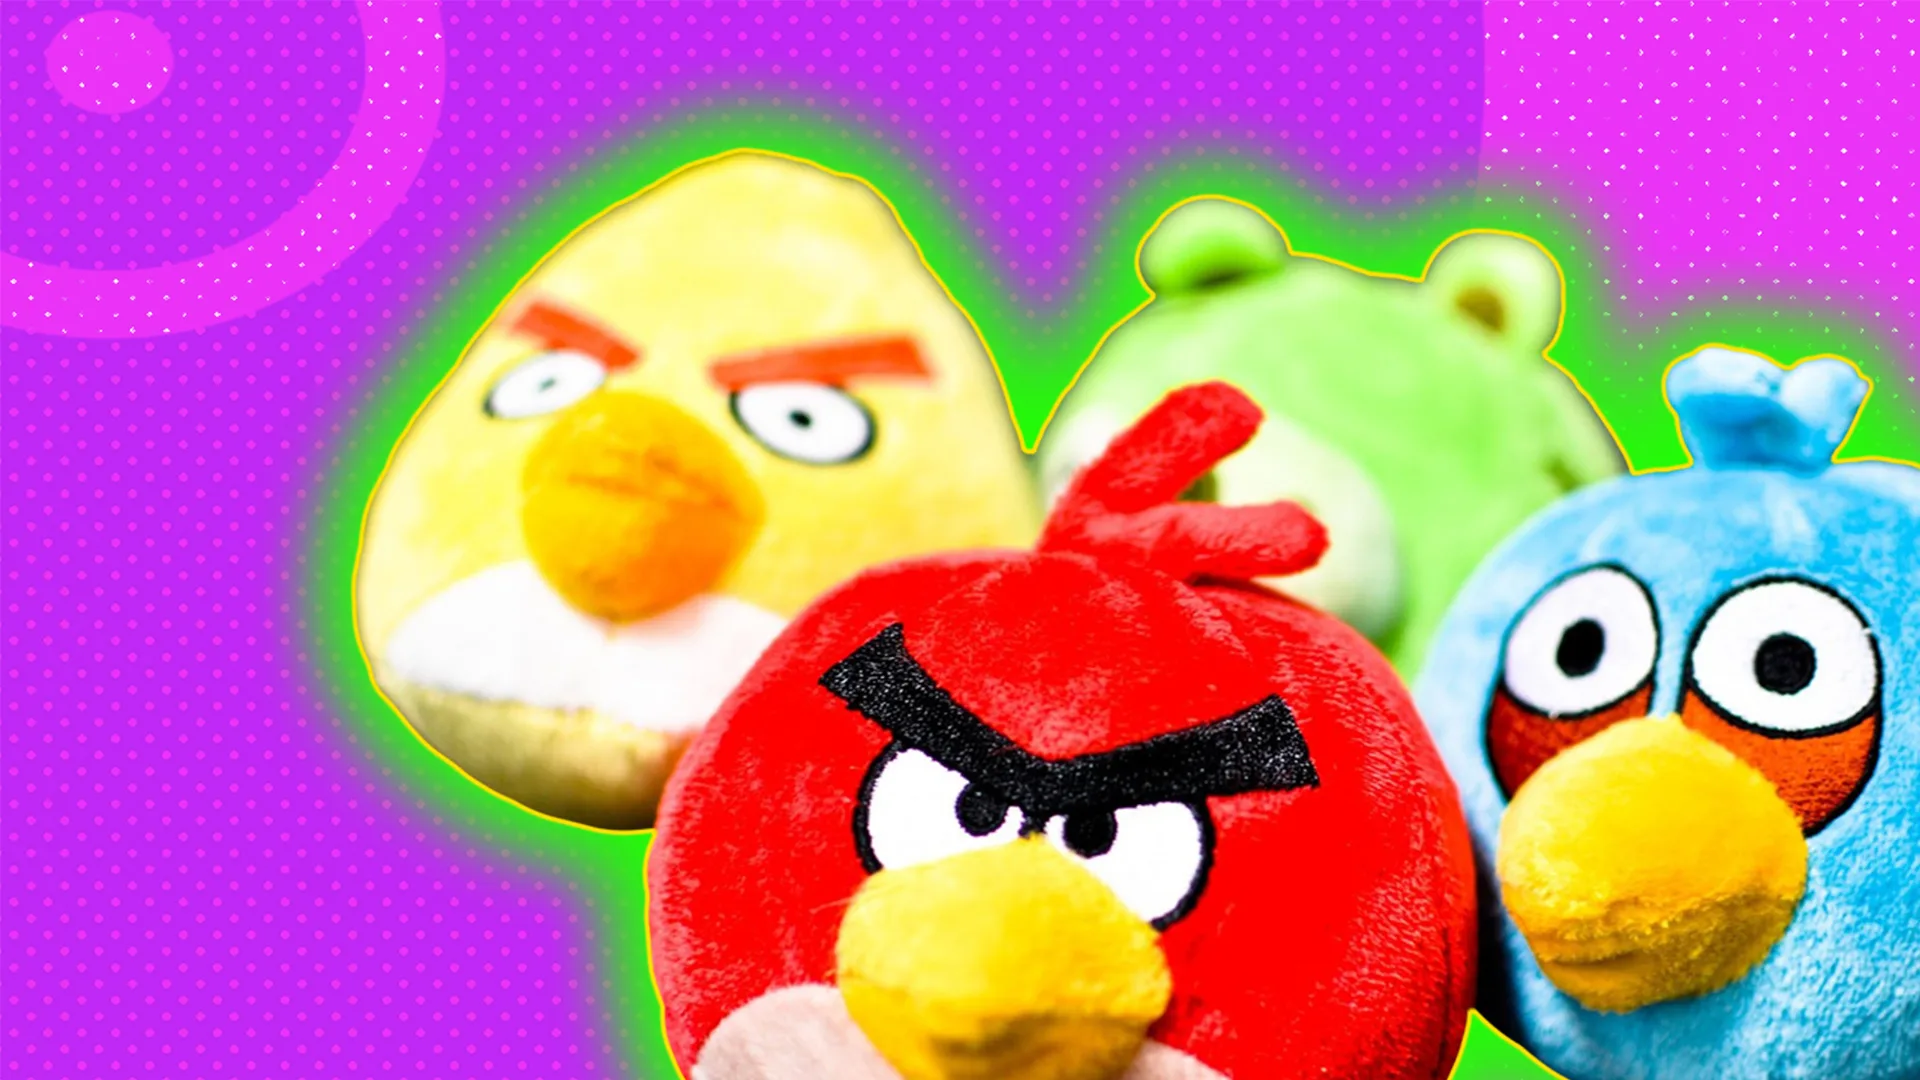 Angry Birds plush toys - in graphic house style